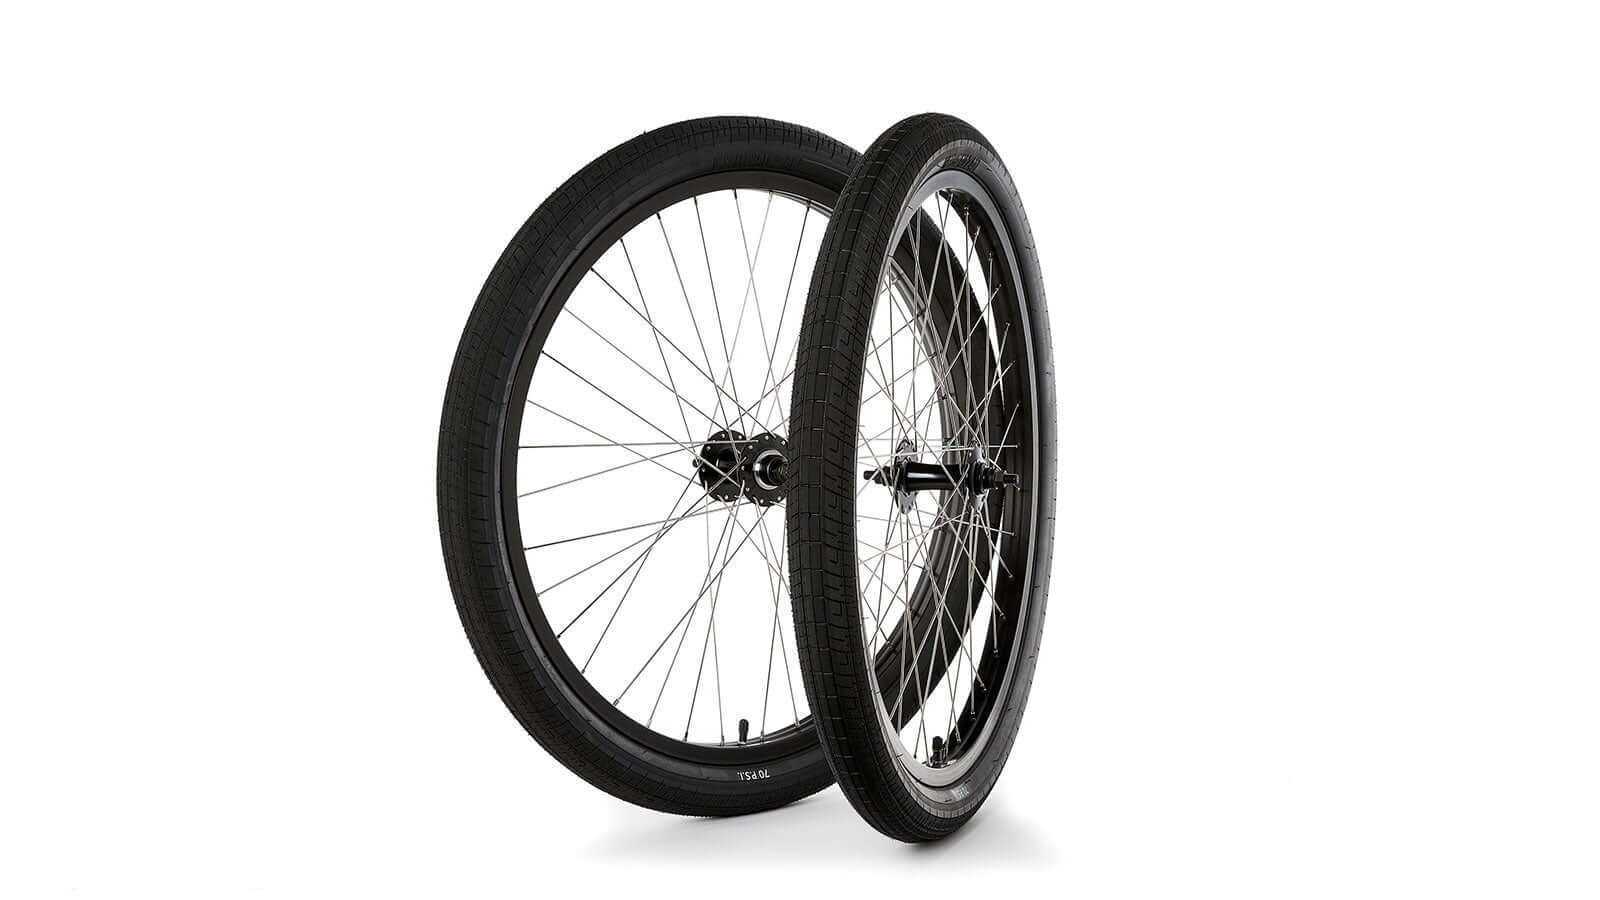 20" FIT FREECOASTER WHEELSET RIGHT SIDE DRIVE . DOUBLE WALL FIT BLK RIMS, BLK HUBS. MALE 4MM REAR AXLE, MALE 3/8" FRONT AXLE. ALL BLACK SPOKES/NIPPLES-Featuring fully sealed front male 3/8" hub and 4mm male rear FREECOASTER laced to light and strong Fit Double Wall OEM rims. Specifications Sealed male 3/8" Front Axle Sealed FREECOASTER rear w/4mm Rear Axle male recessed 6MM Allen slot in axle 9T R.H.D. Fit Rim Strip 36H Double Wall Fit OEM Rims-5050 Bike & Skate